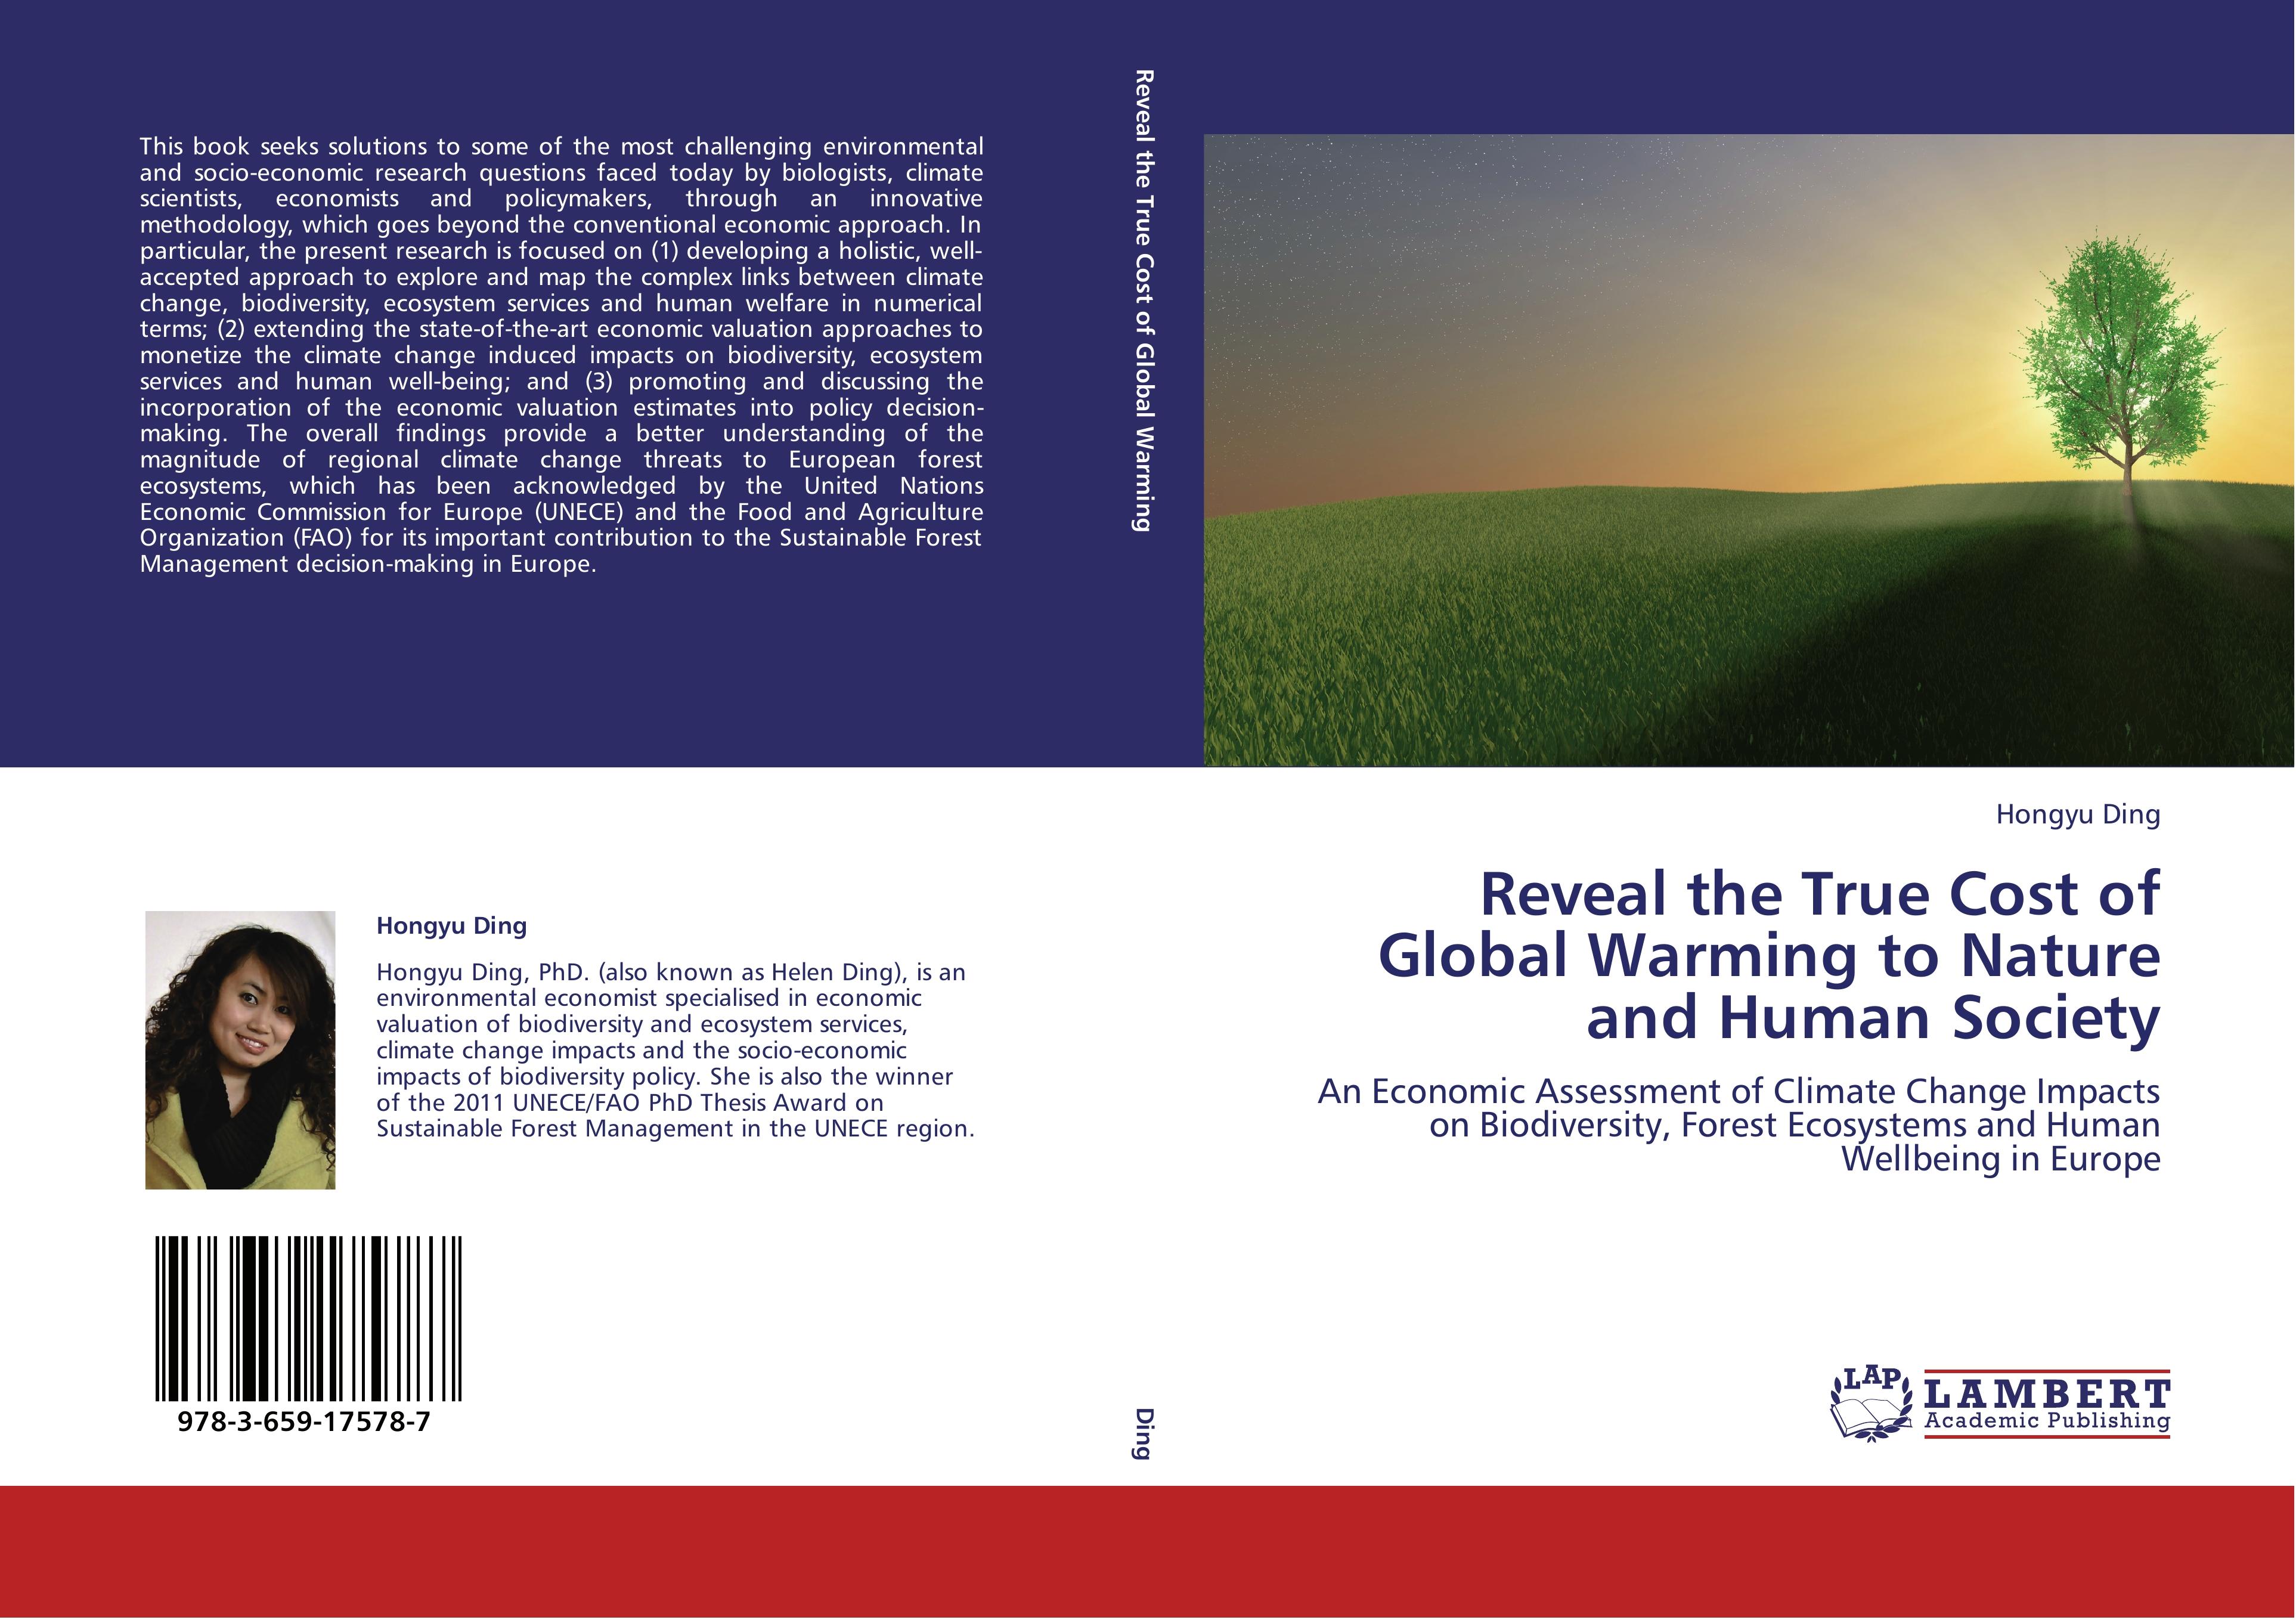 Reveal the True Cost of Global Warming to Nature and Human Society / An Economic Assessment of Climate Change Impacts on Biodiversity, Forest Ecosystems and Human Wellbeing in Europe / Hongyu Ding - Ding, Hongyu